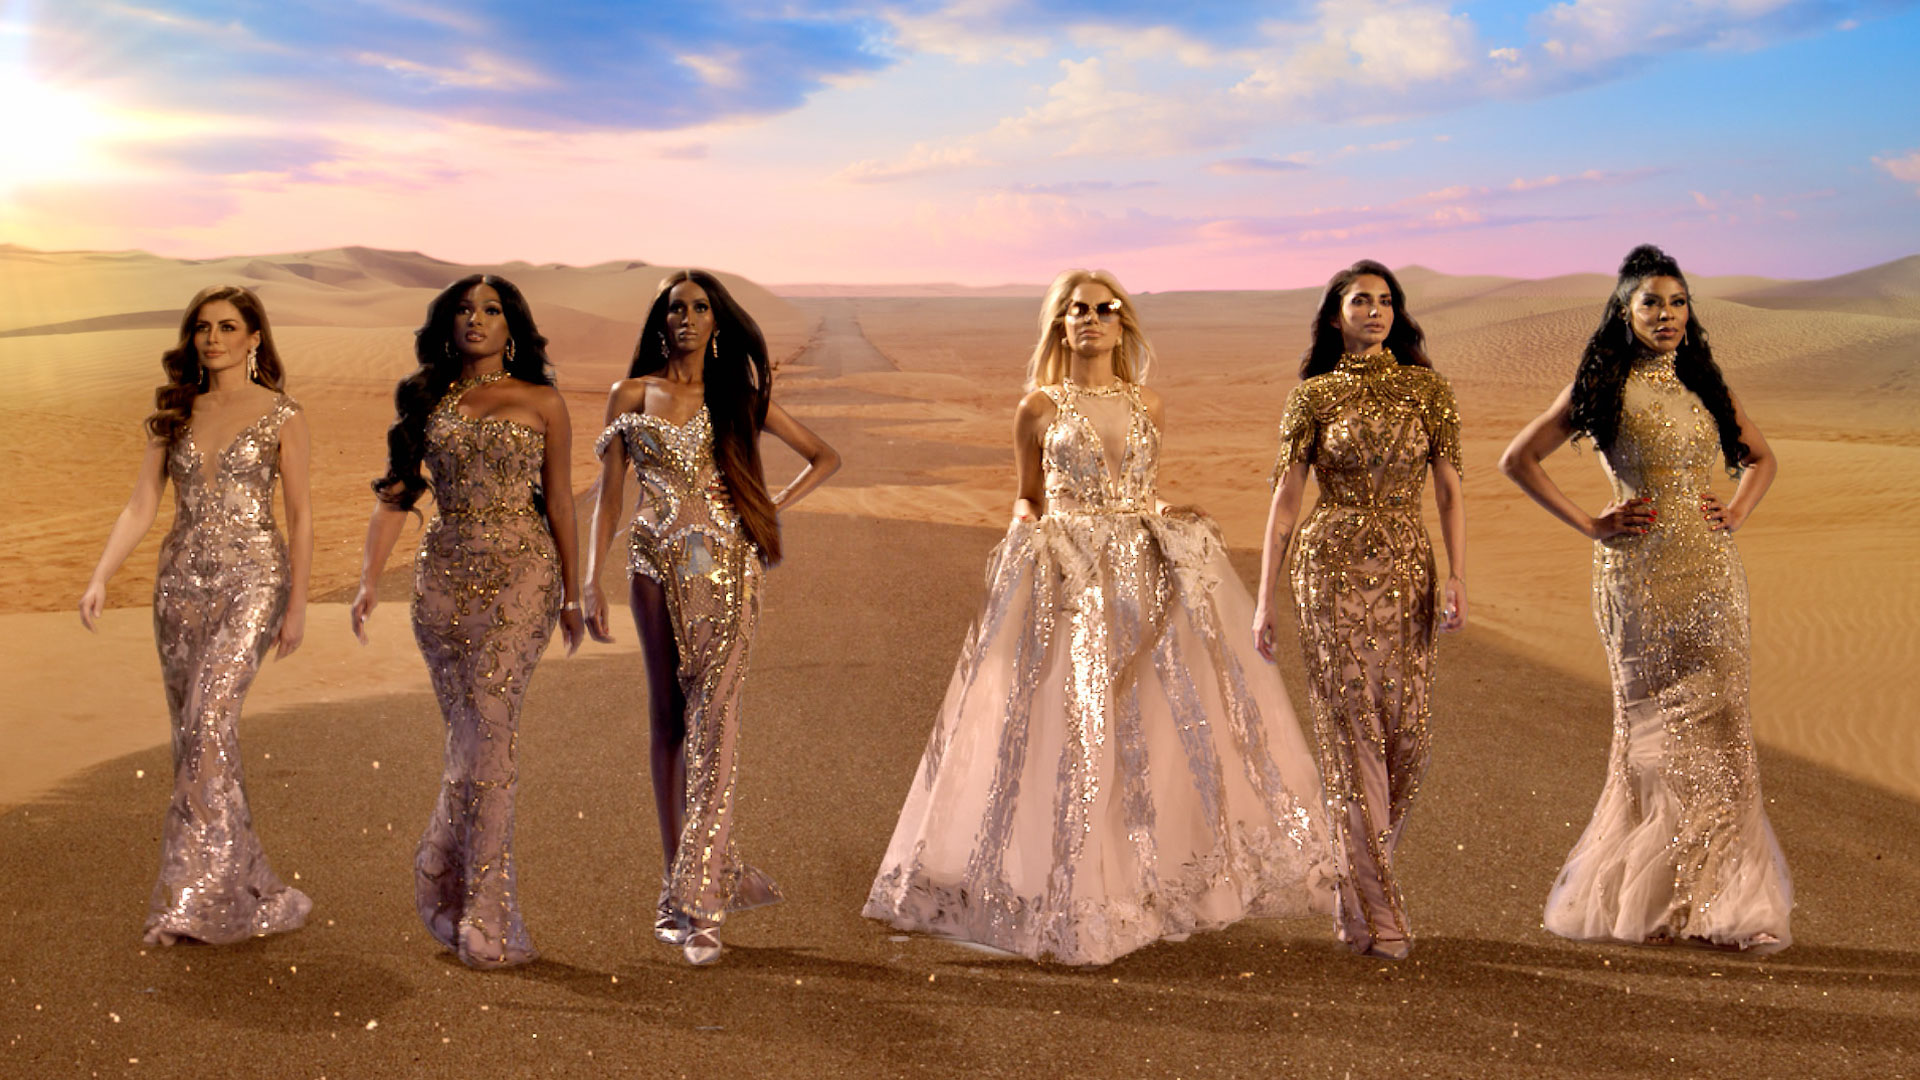 The Real Housewives Of Dubai Cast, Trailer, Premiere, Spoilers